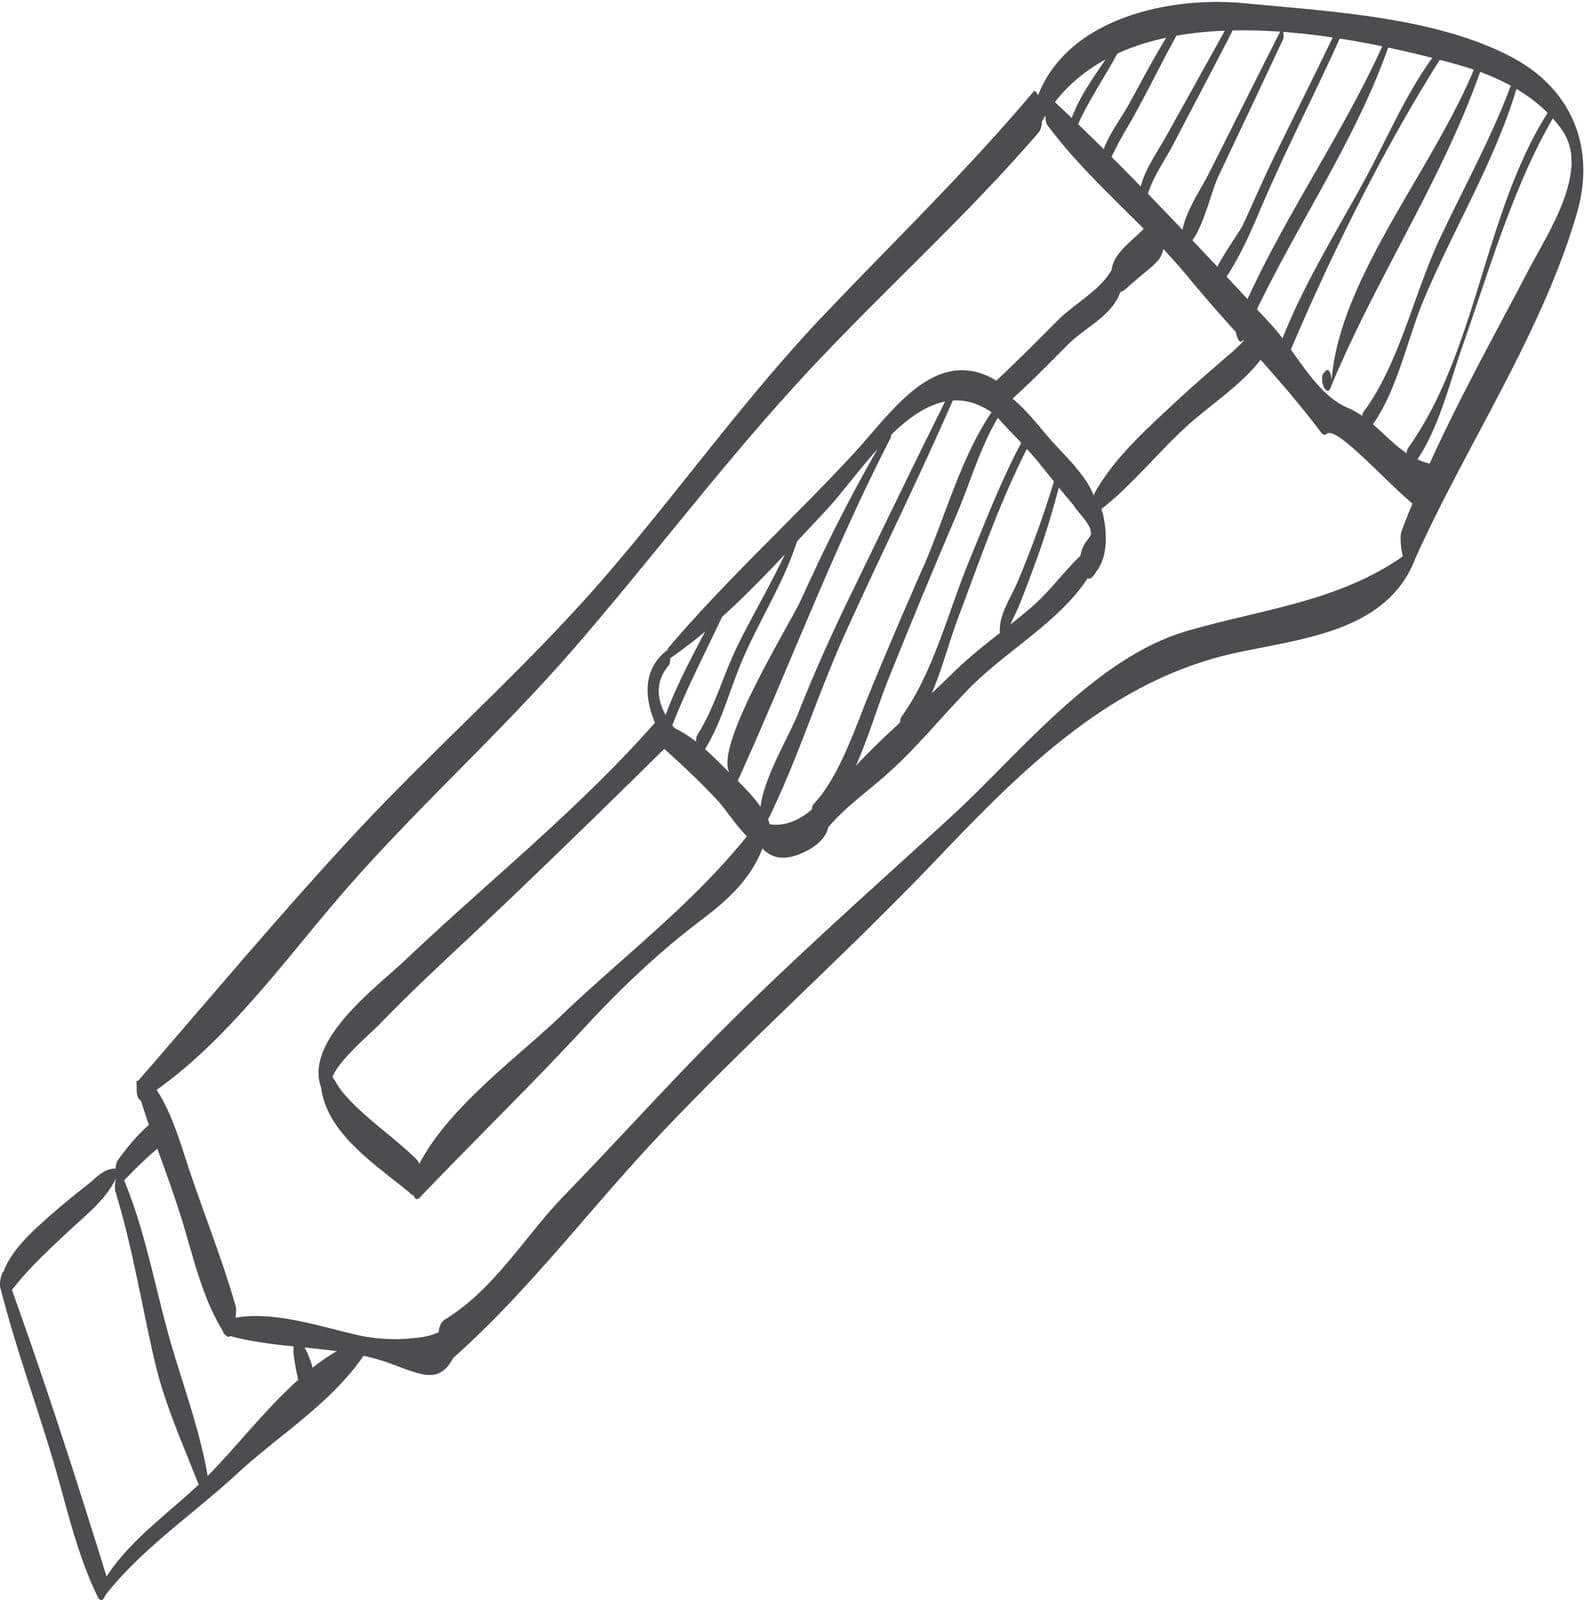 Sketch icon - Cutter knife by puruan